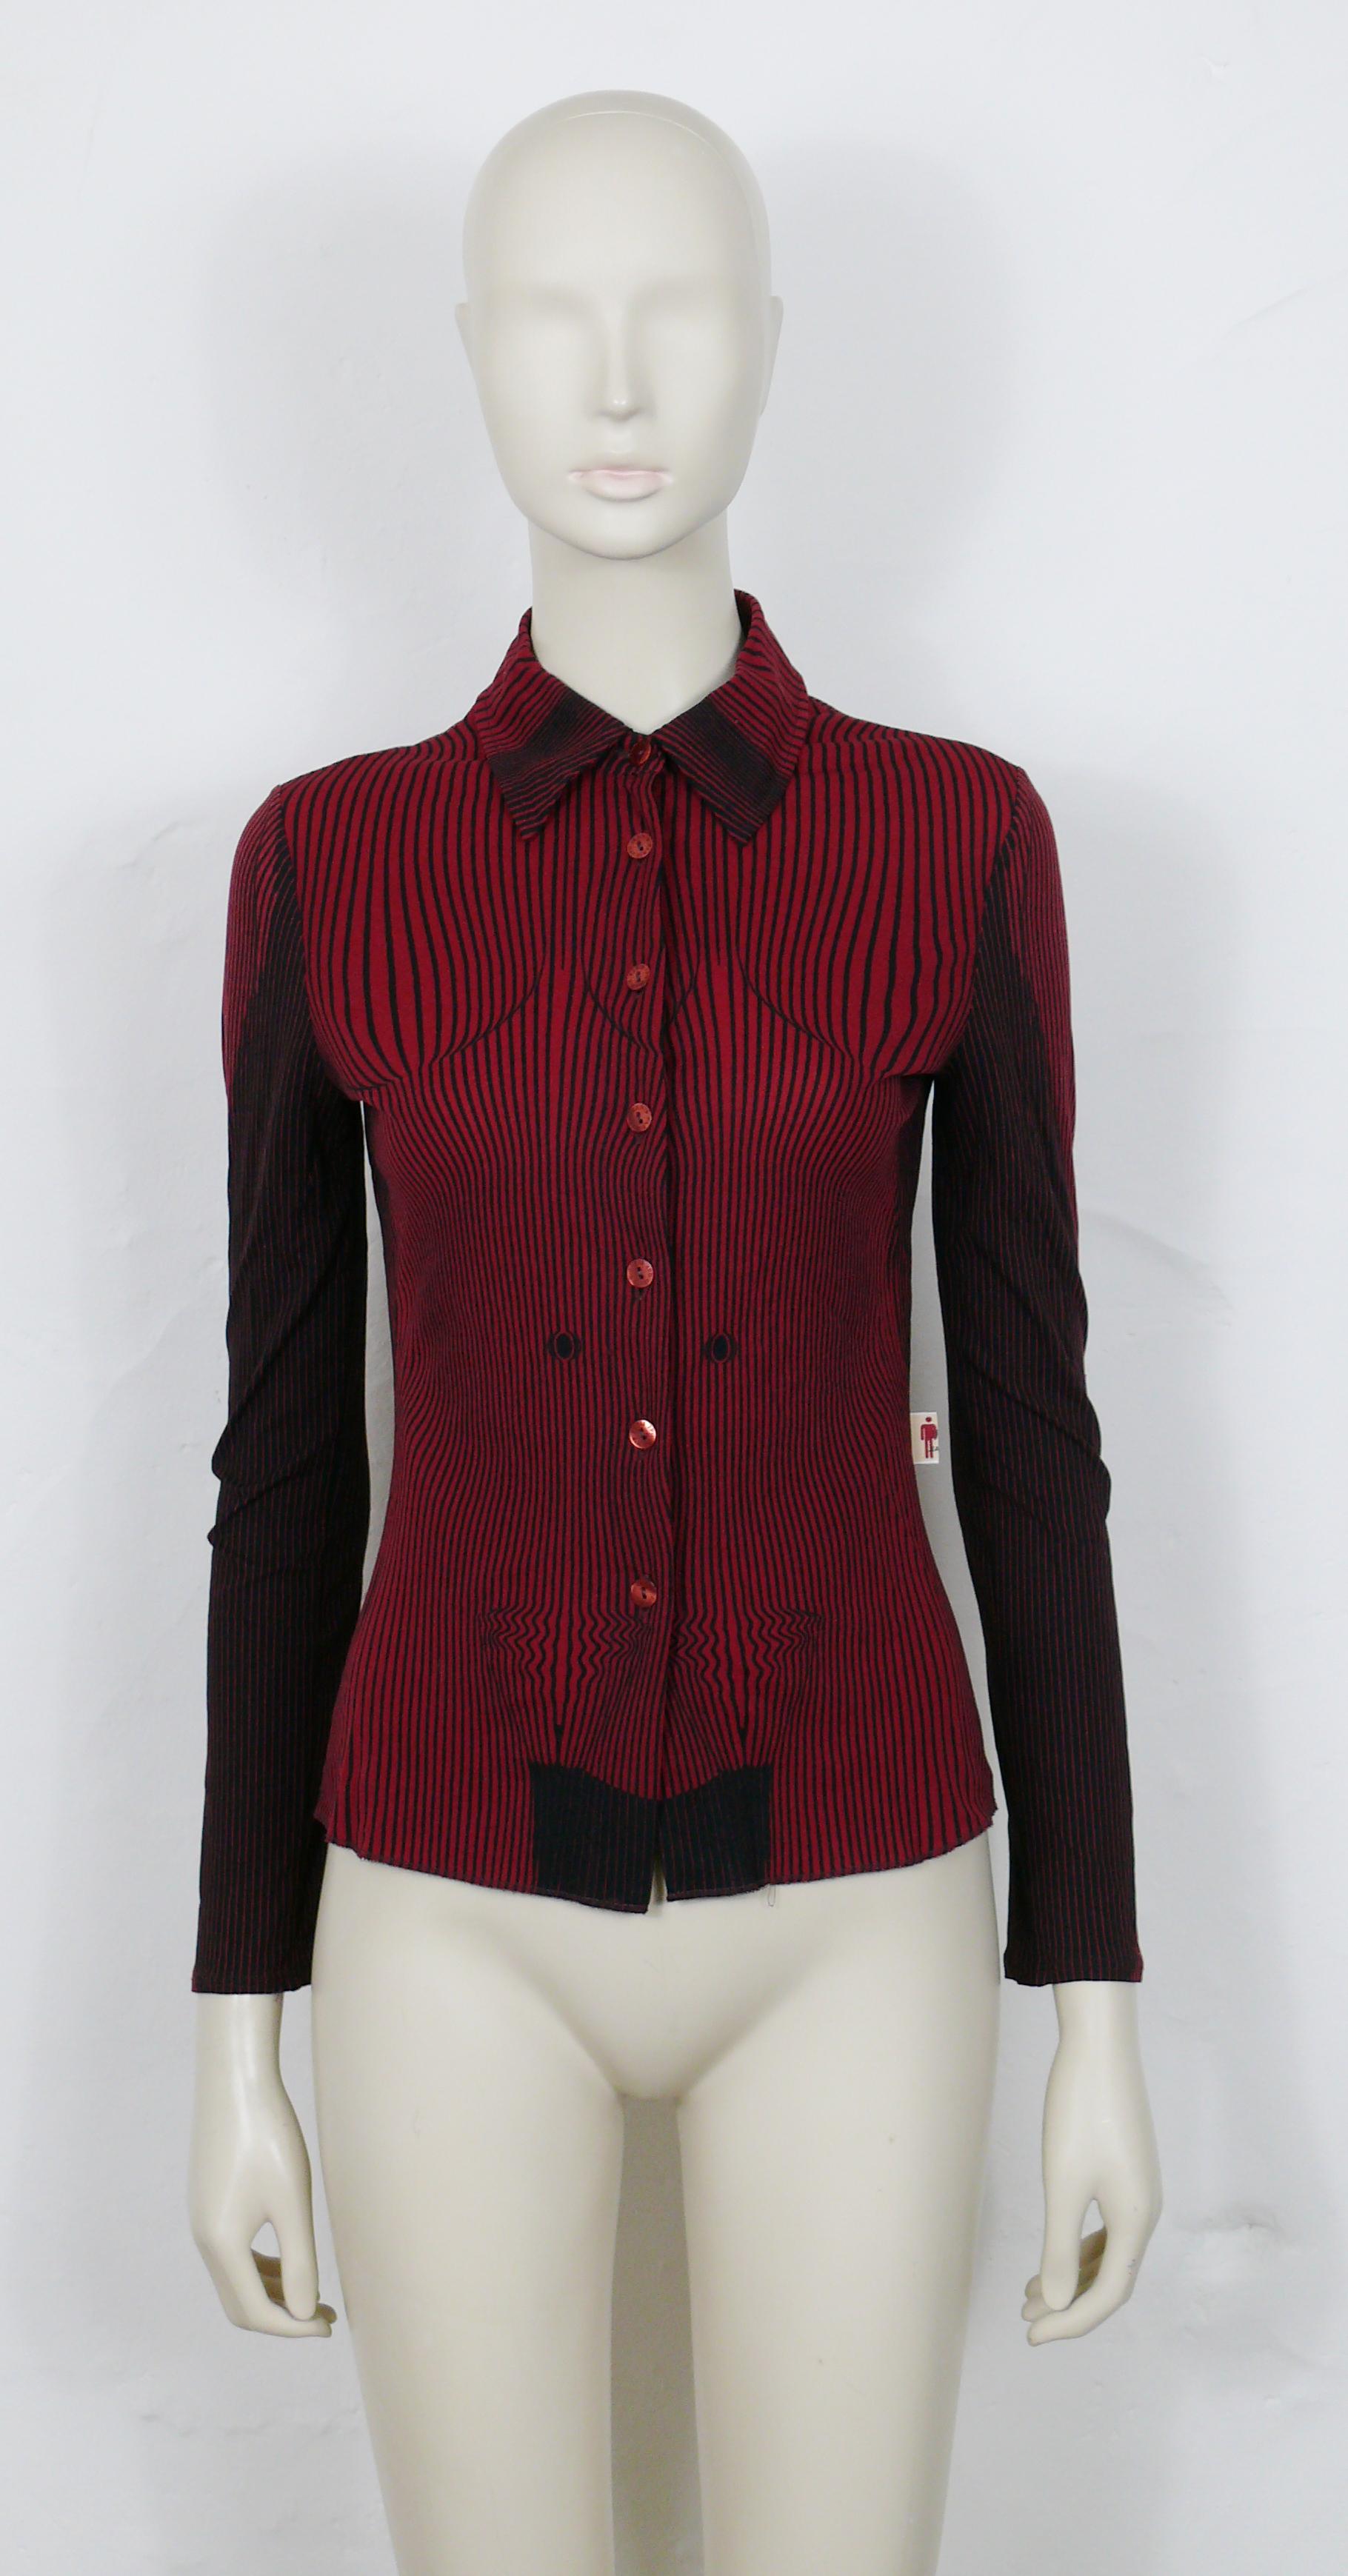 Jean Paul Gaultier Iconic Vintage Red Black Op Art Nude Torso Shirt In Good Condition For Sale In Nice, FR